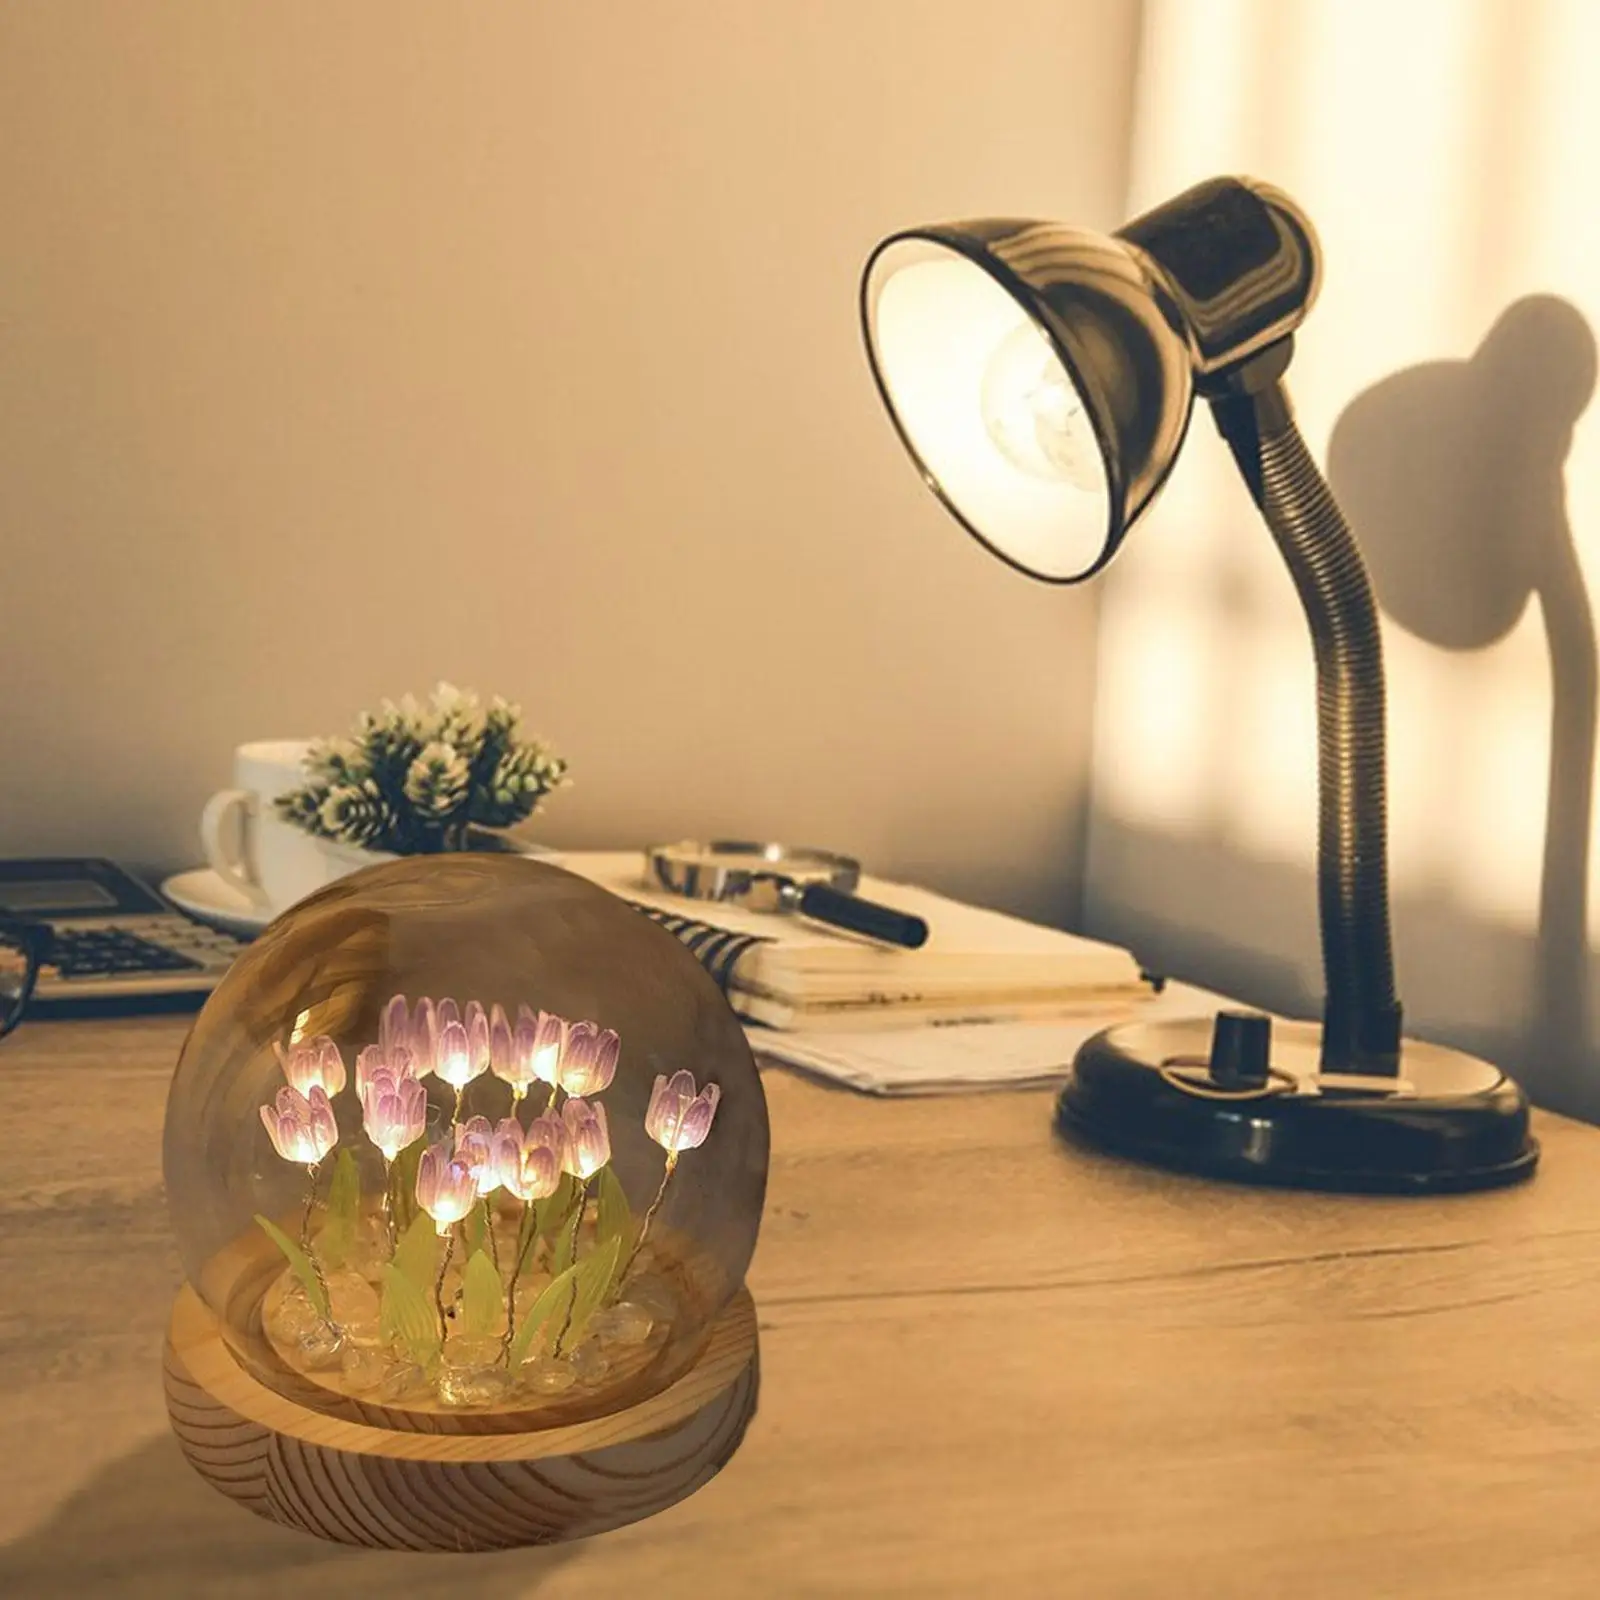 Tulip Flowers Night Light DIY Lighted Flowers Accessories Sleep Lamp with Dome for Party Wedding Holiday Decor Gift